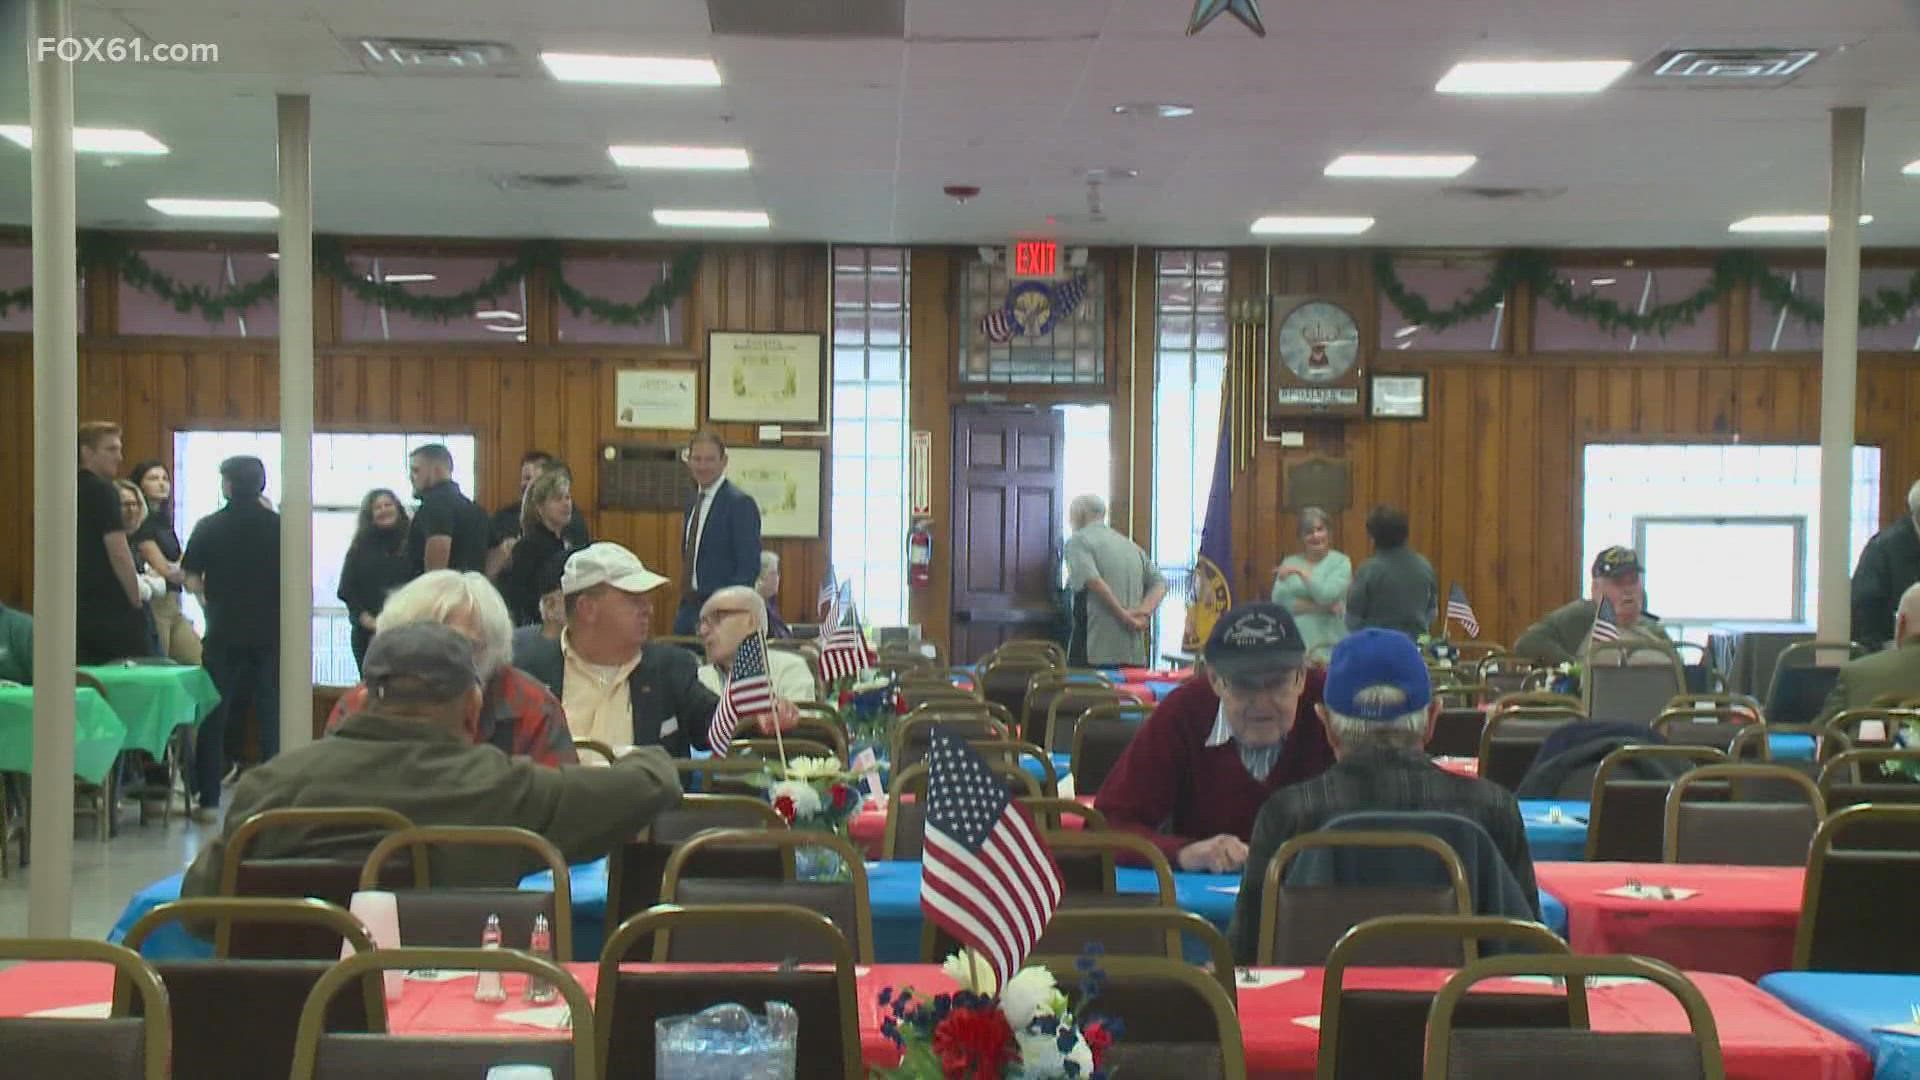 It was a long-awaited reunion of holiday cheer for some 300 local veterans at the Elks Lodge in Manchester on Thursday. It was the first time they had come together